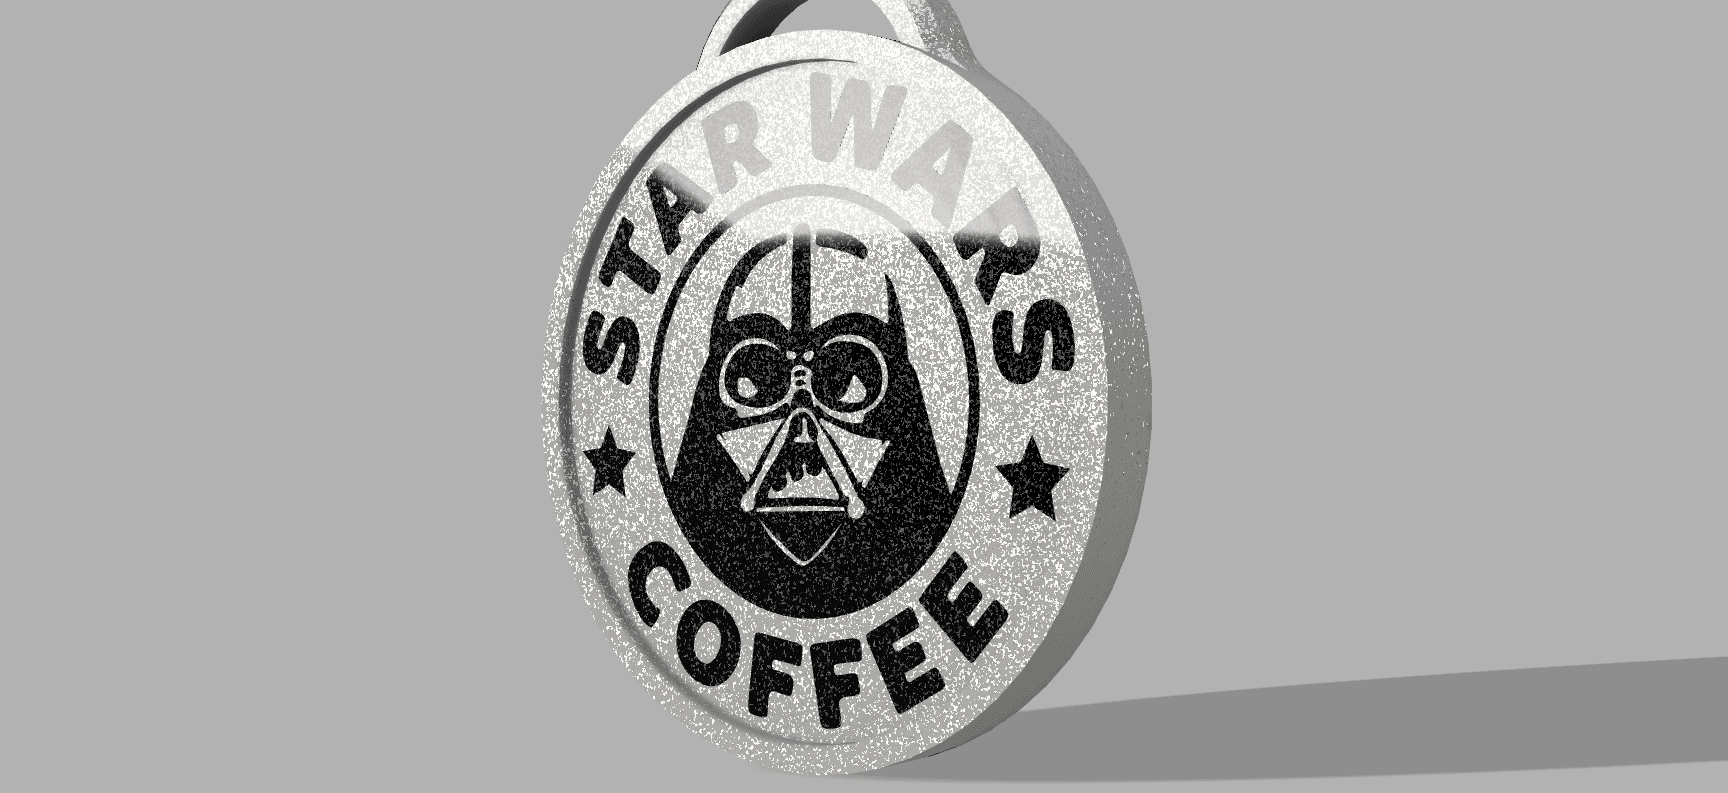 Starwars Coffee - Keychain and/or Ornament 3d model